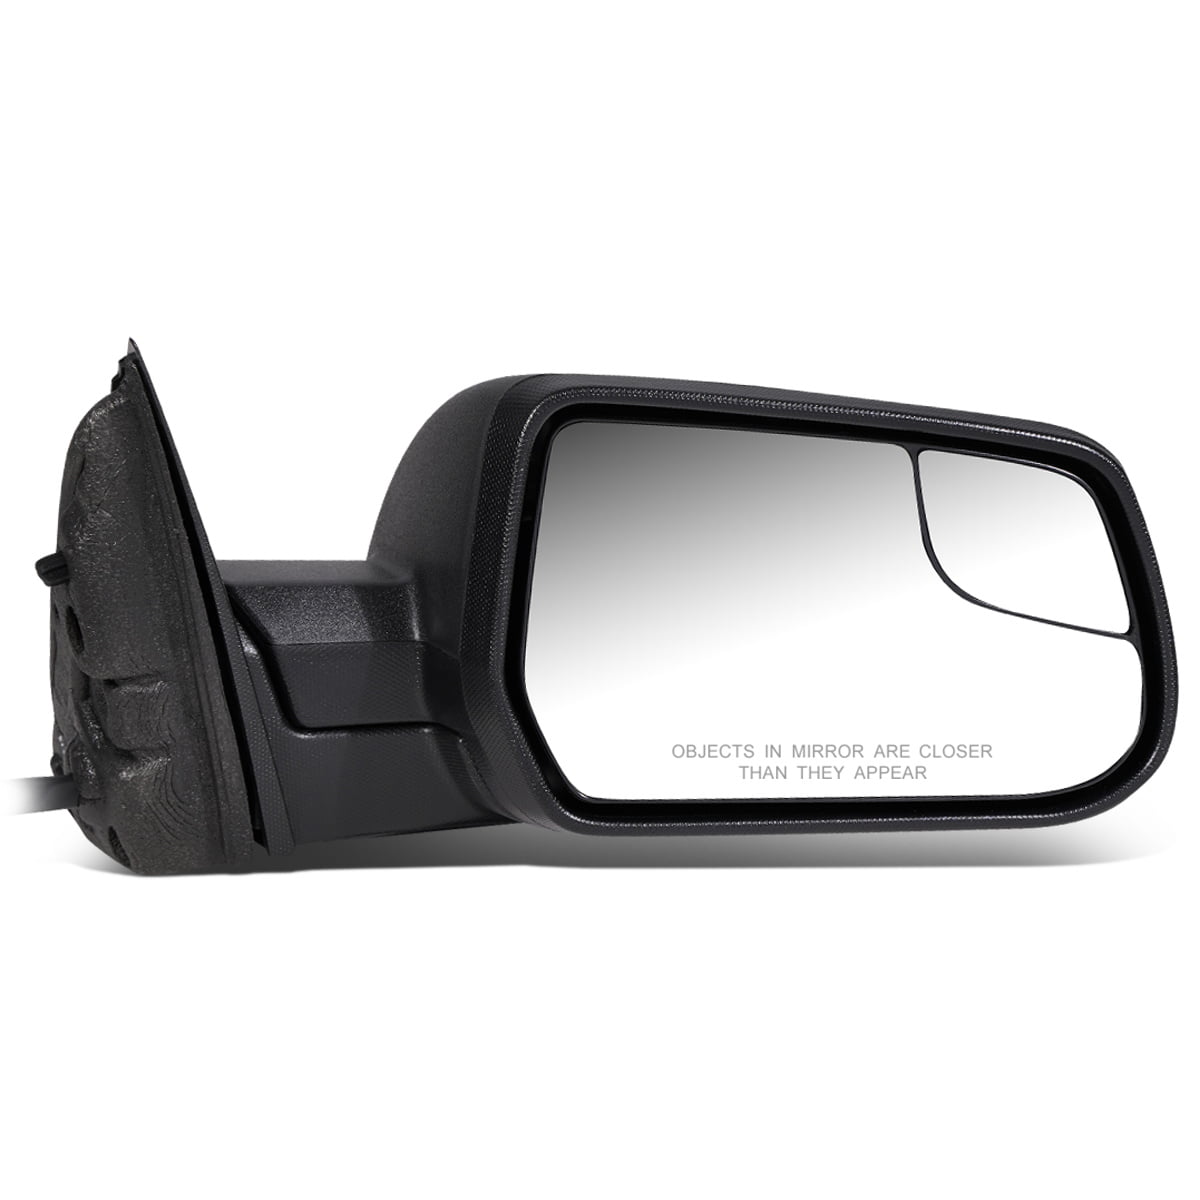 Car Mirror Security Anti-Theft Side Mirror Guard For Chevrolet Equinox 2010-2016